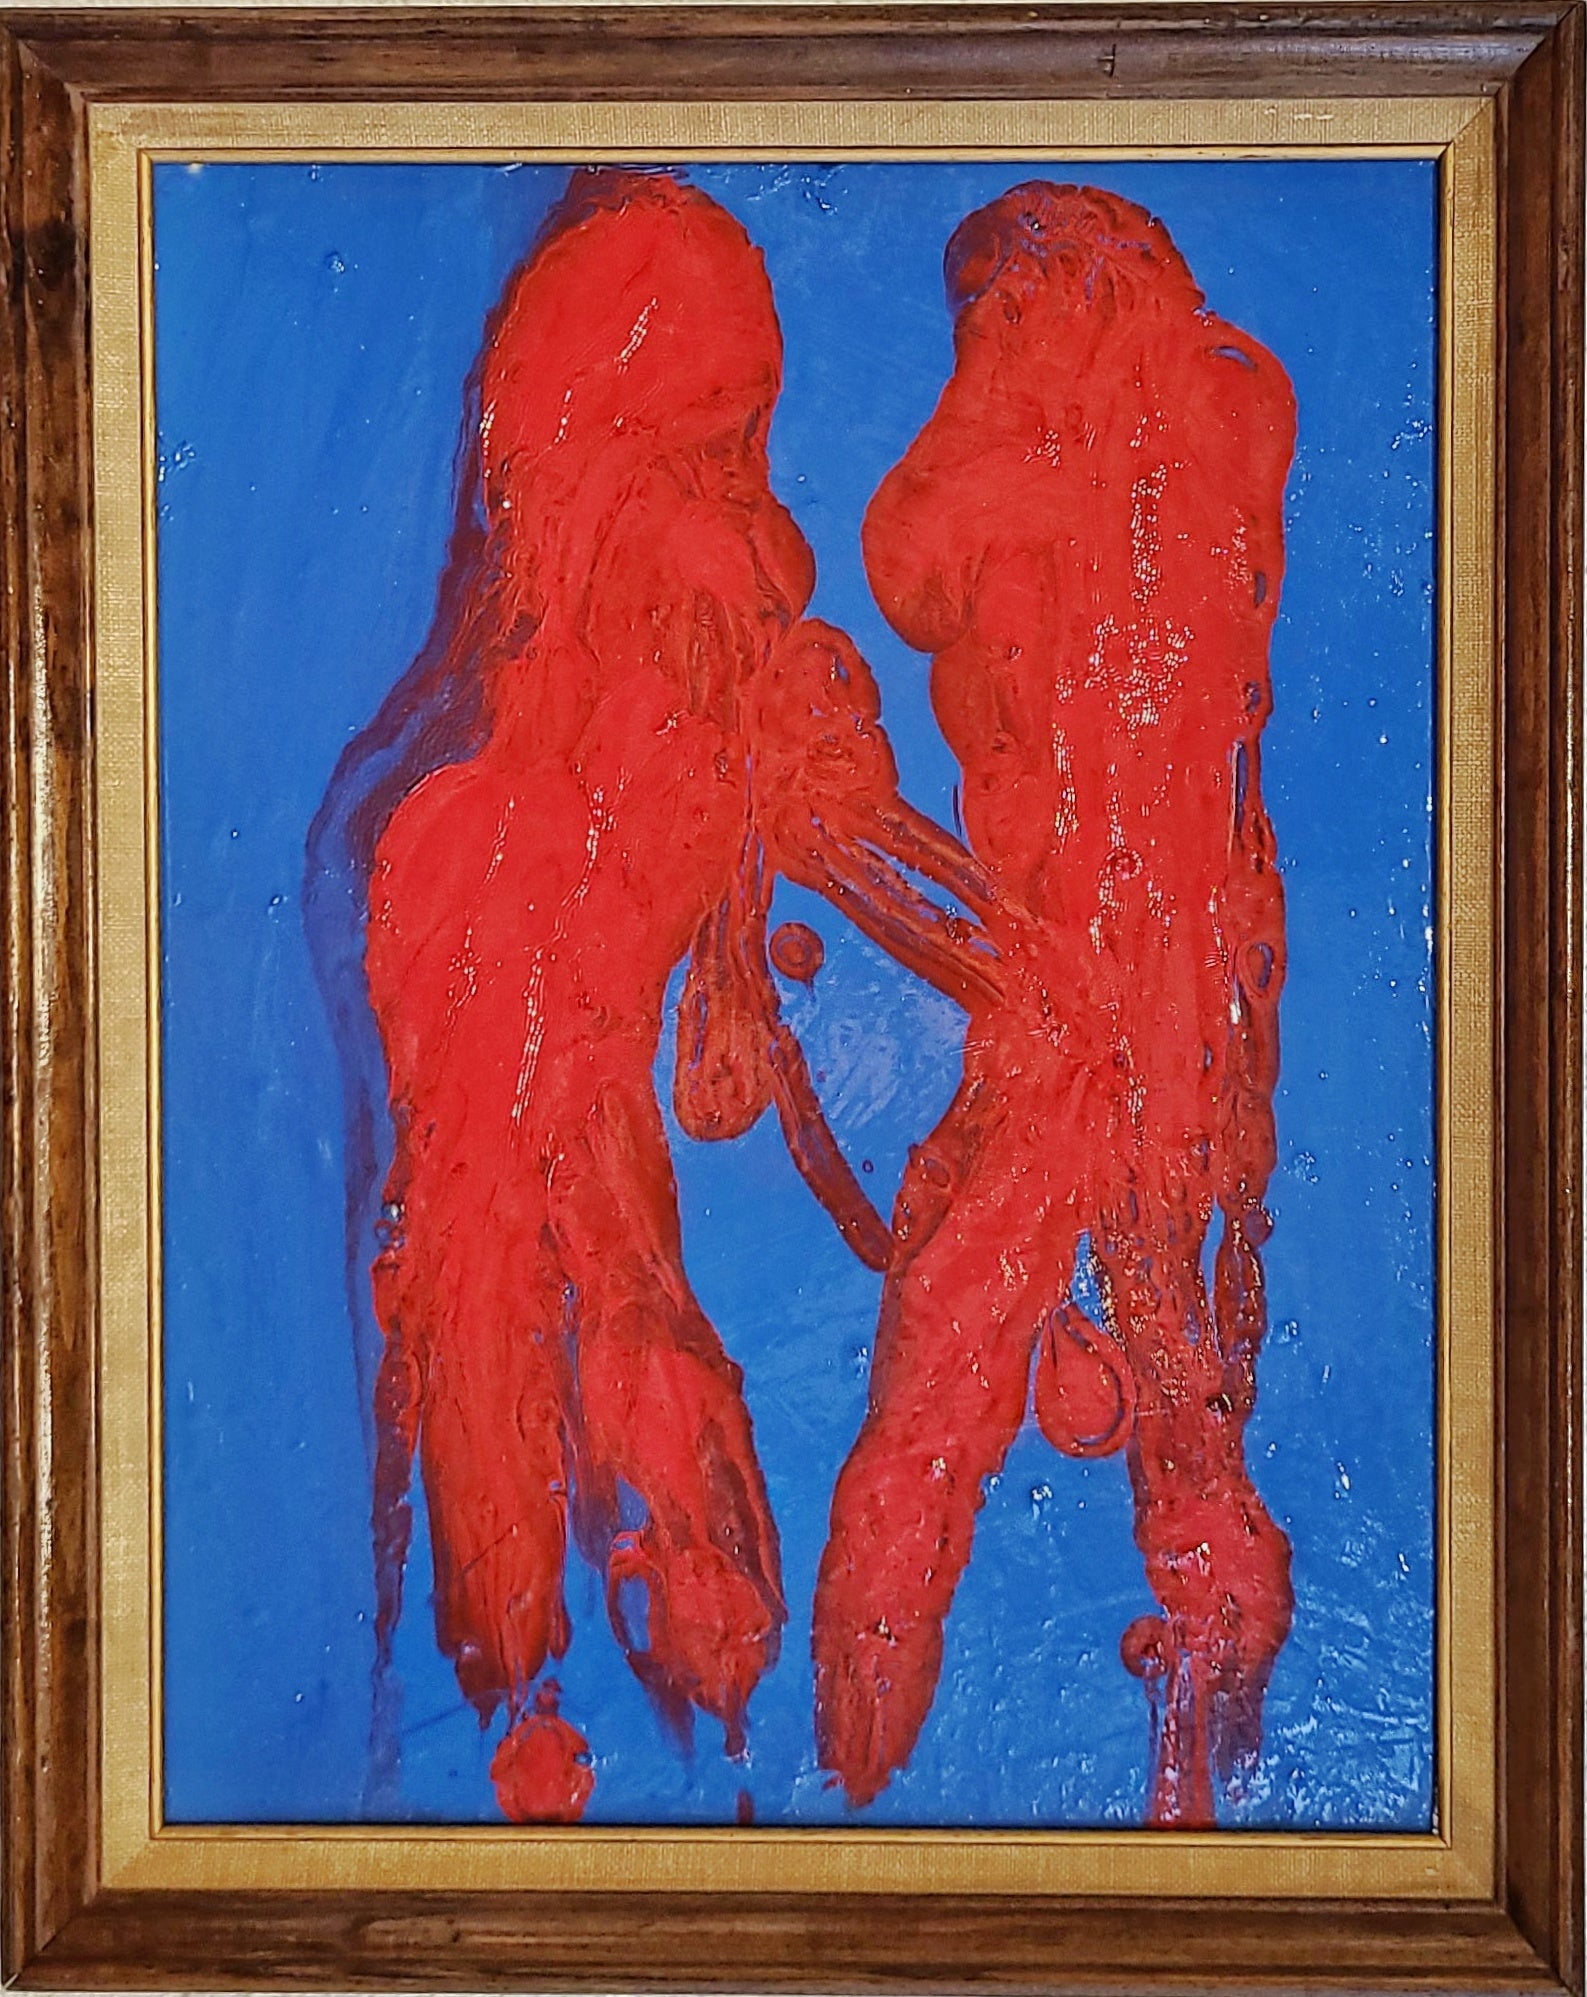 RED ON BLUE ABSTRACT OIL ON BOARD PAINTING BY PULGINI